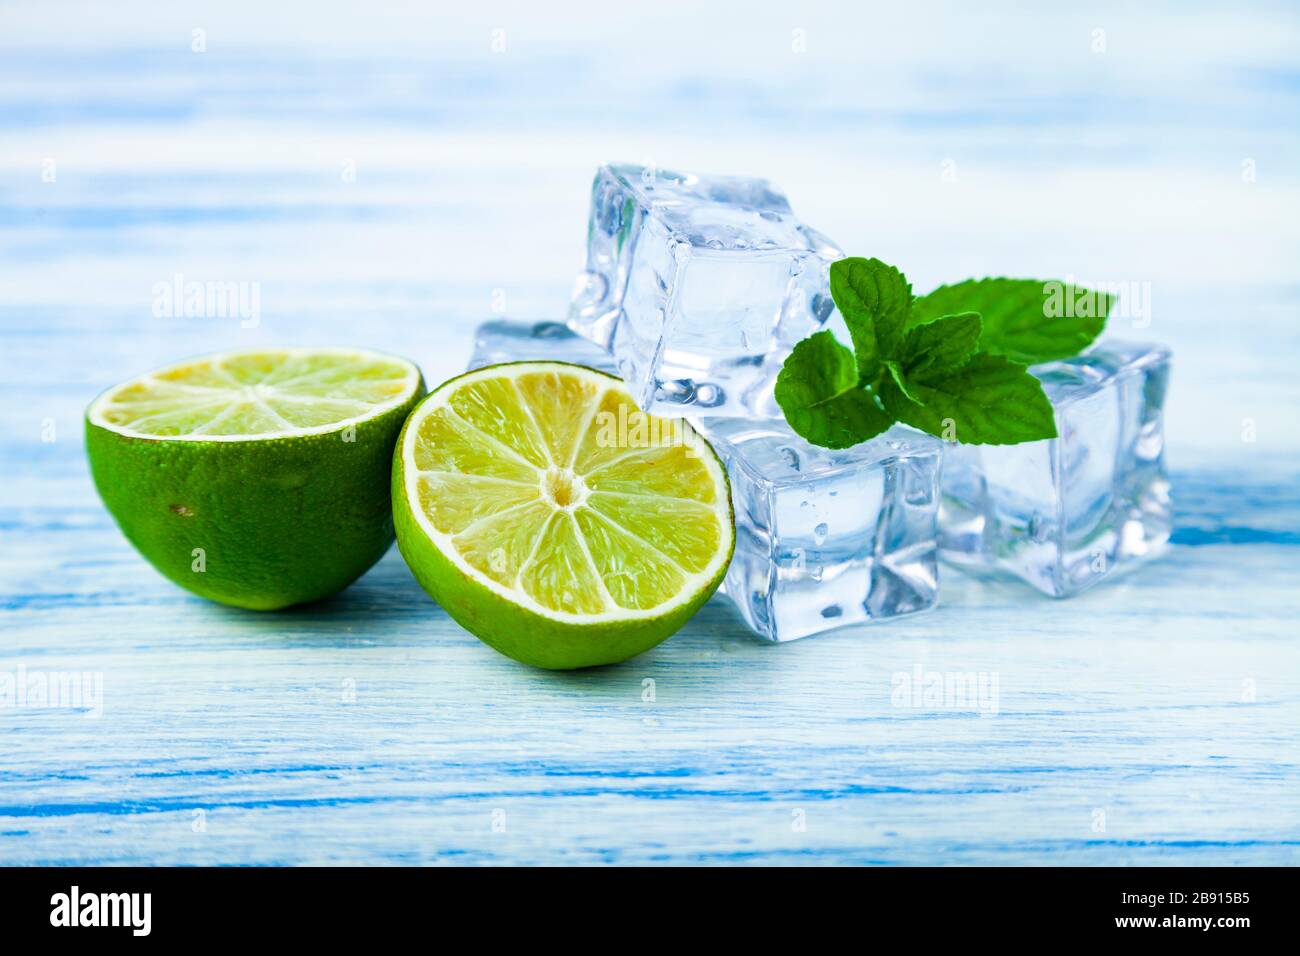 Lime, ice and mint on a blue wooden table. Stock Photo